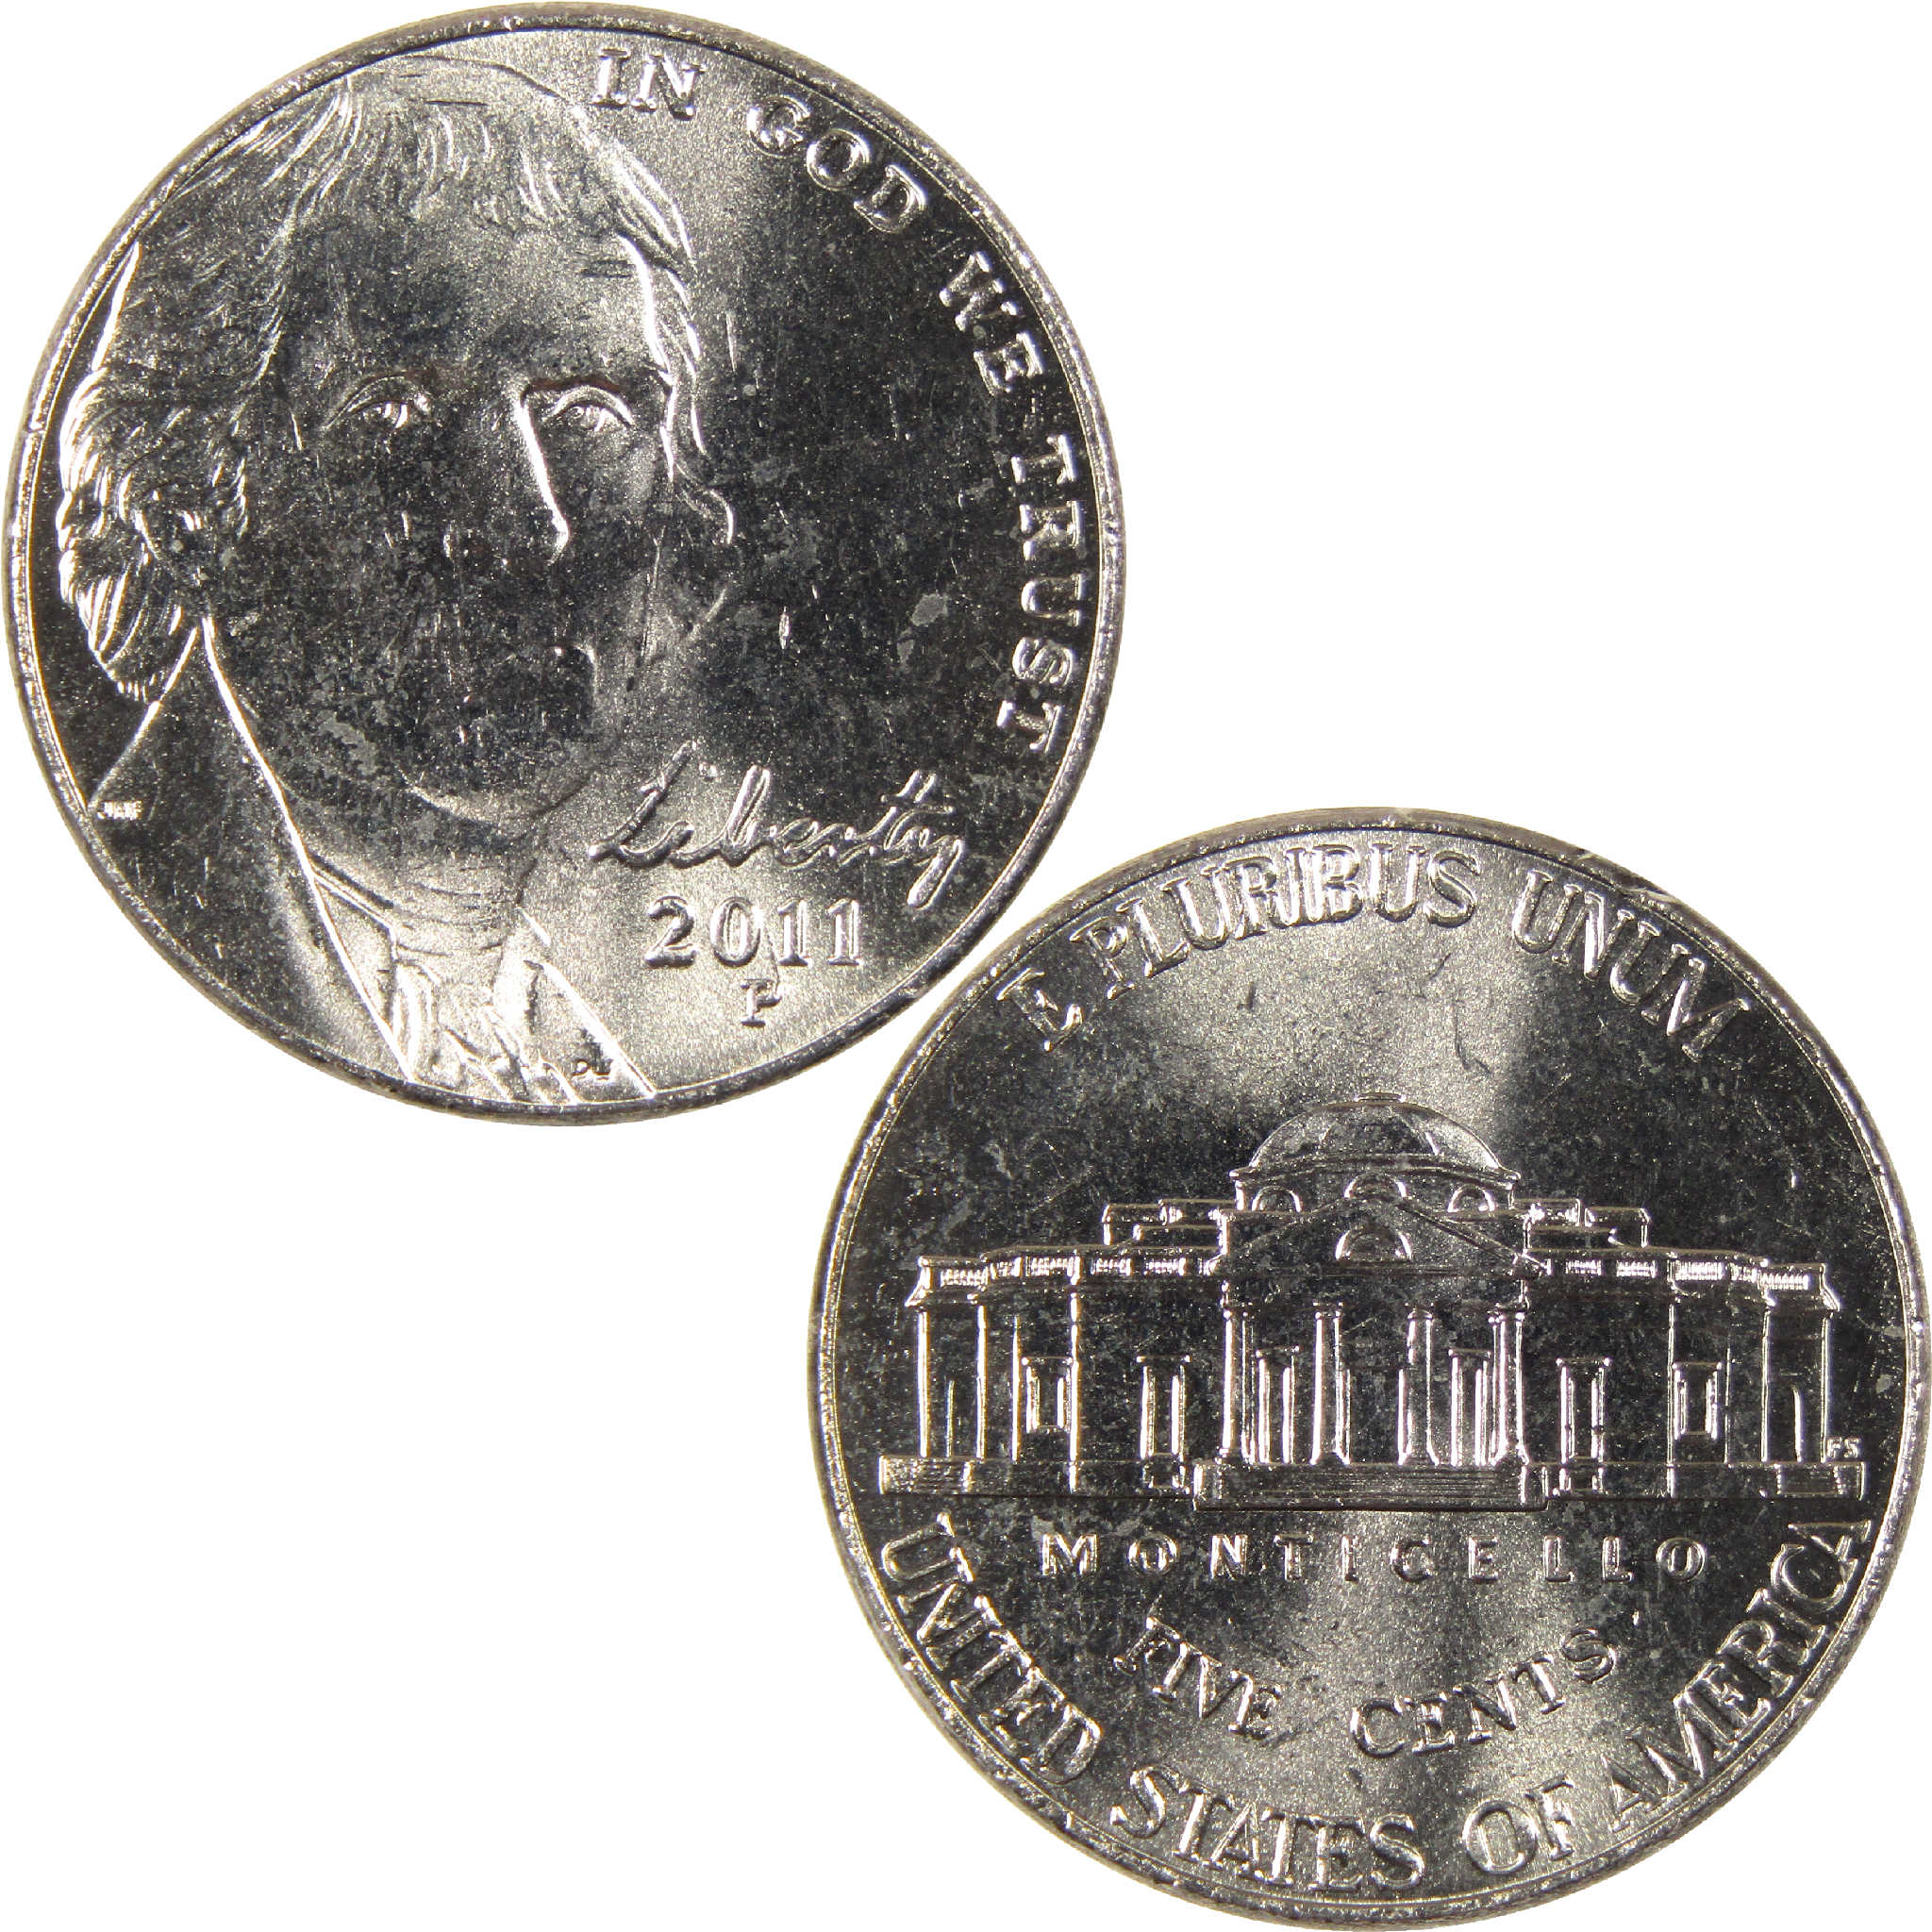 2011 P Jefferson Nickel Uncirculated 5c Coin